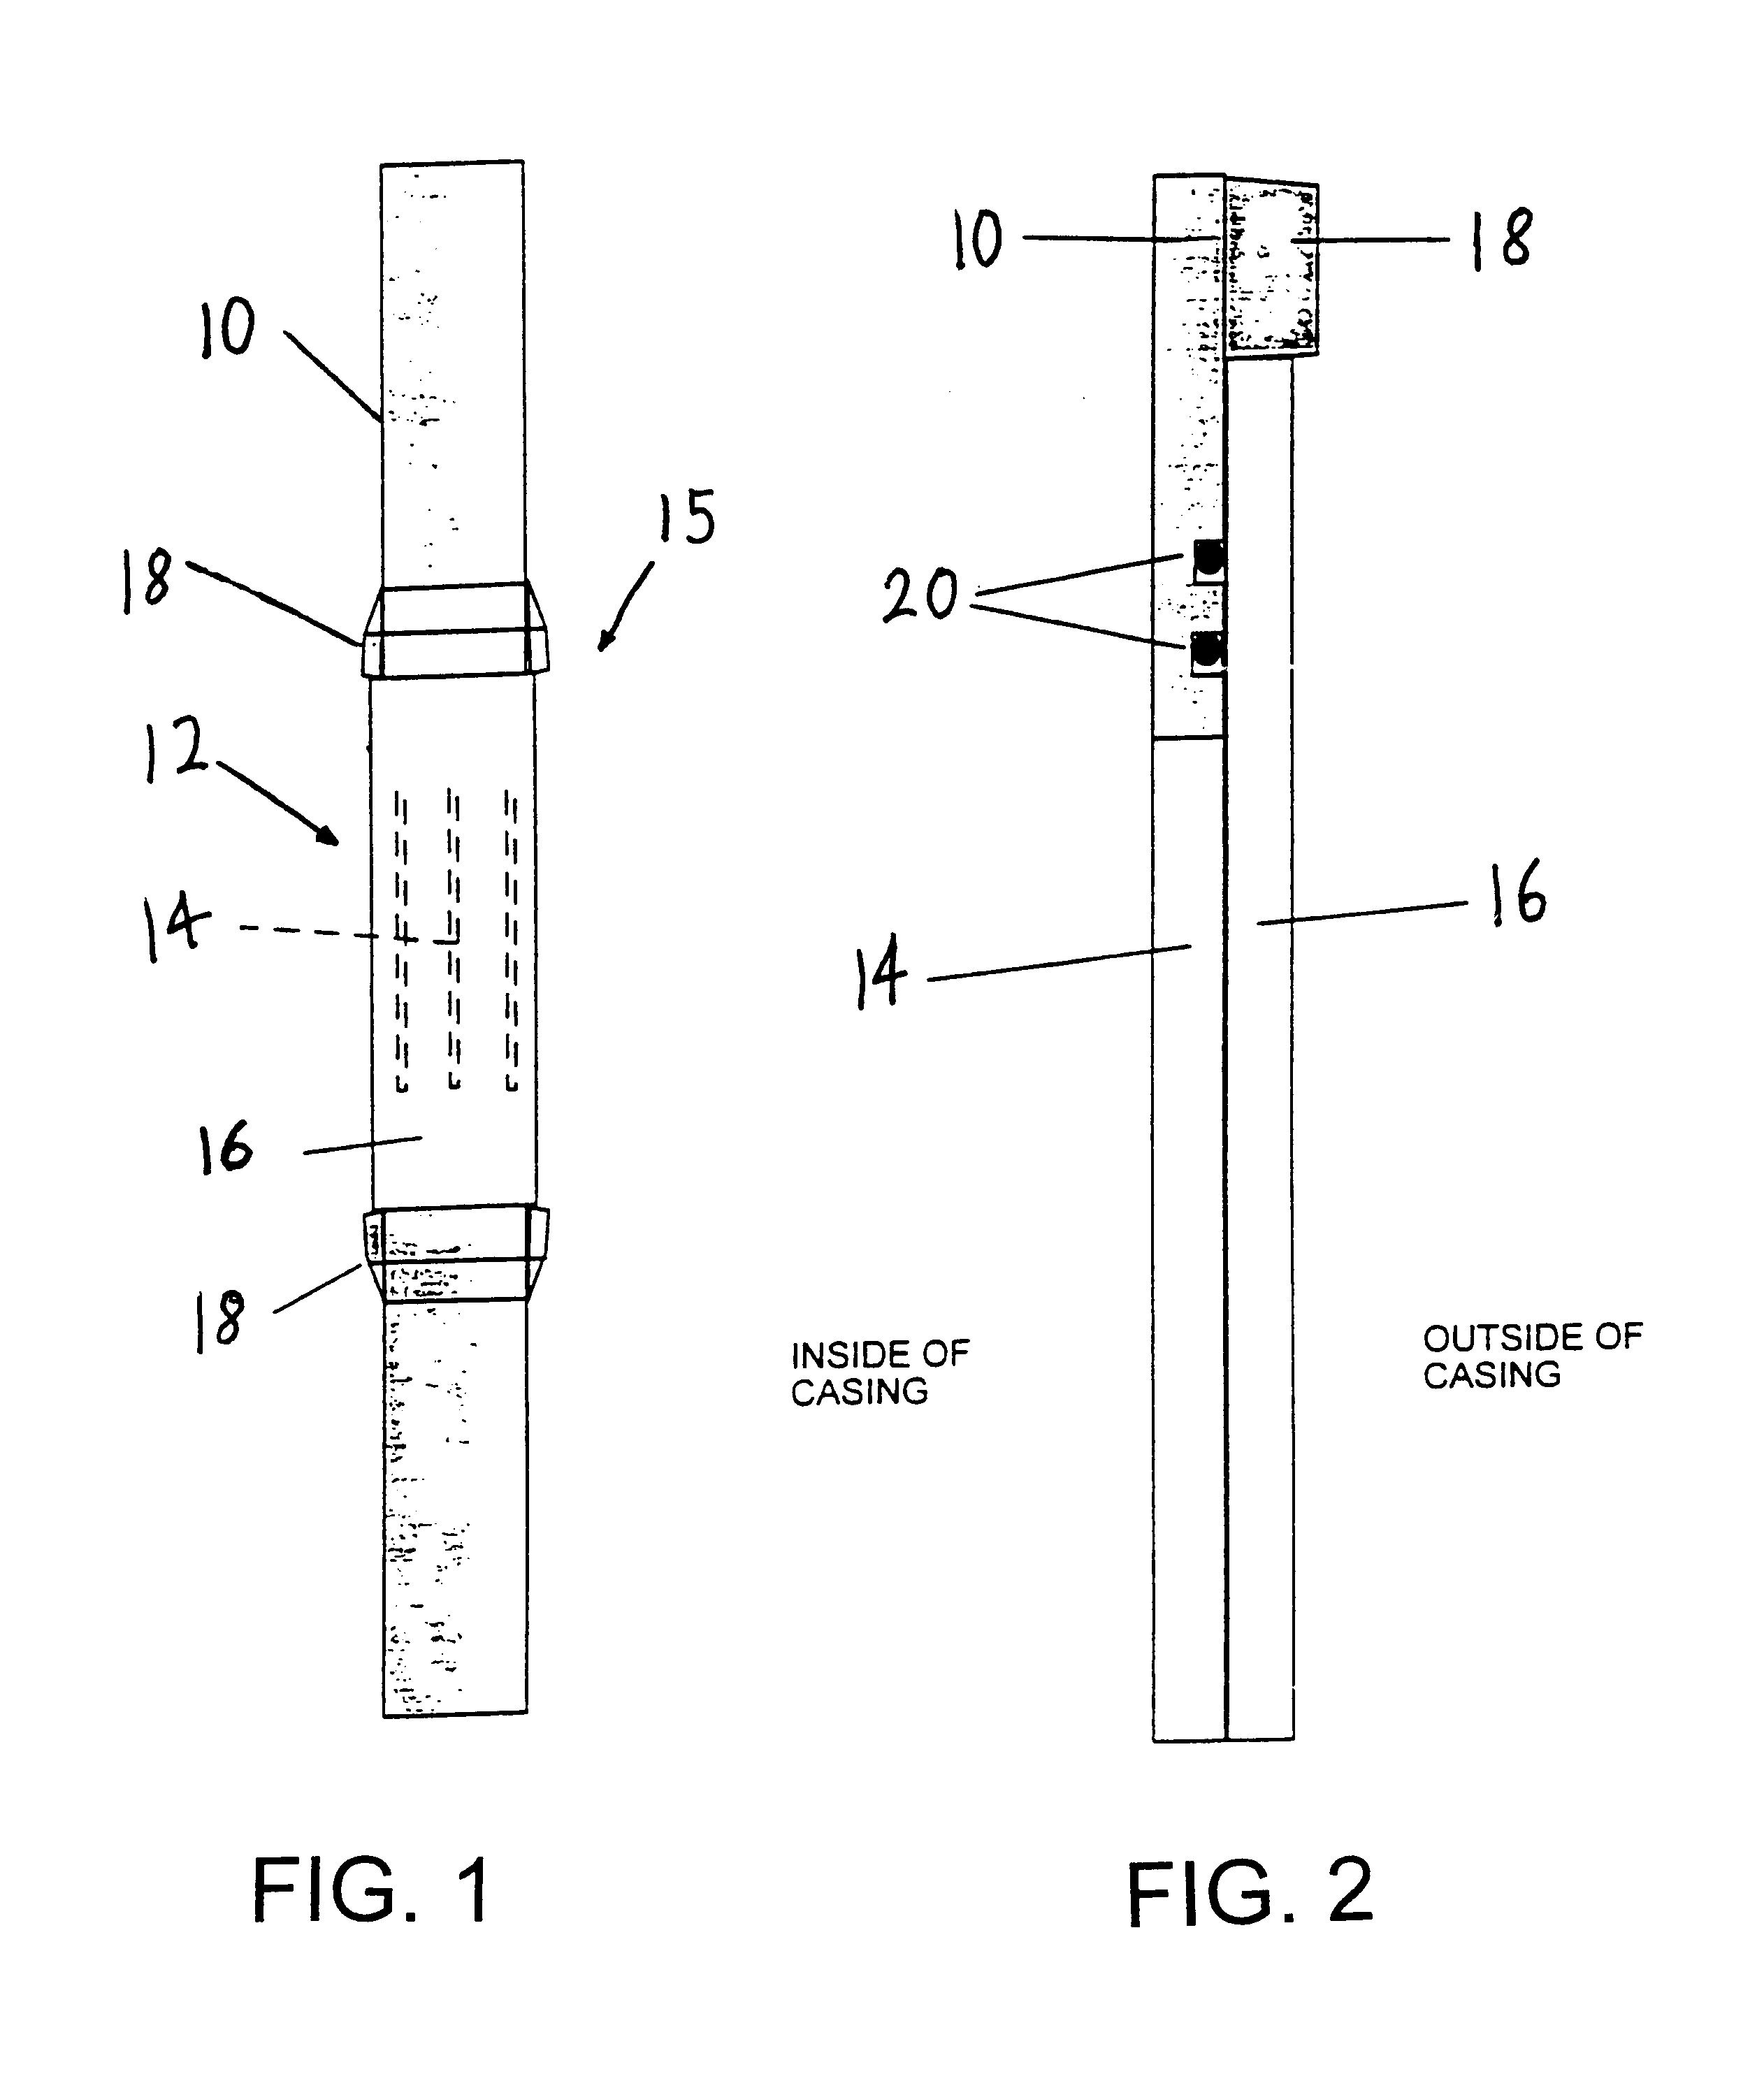 Subsurface monitoring and borehole placement using a modified tubular equipped with tilted or transverse magnetic dipoles